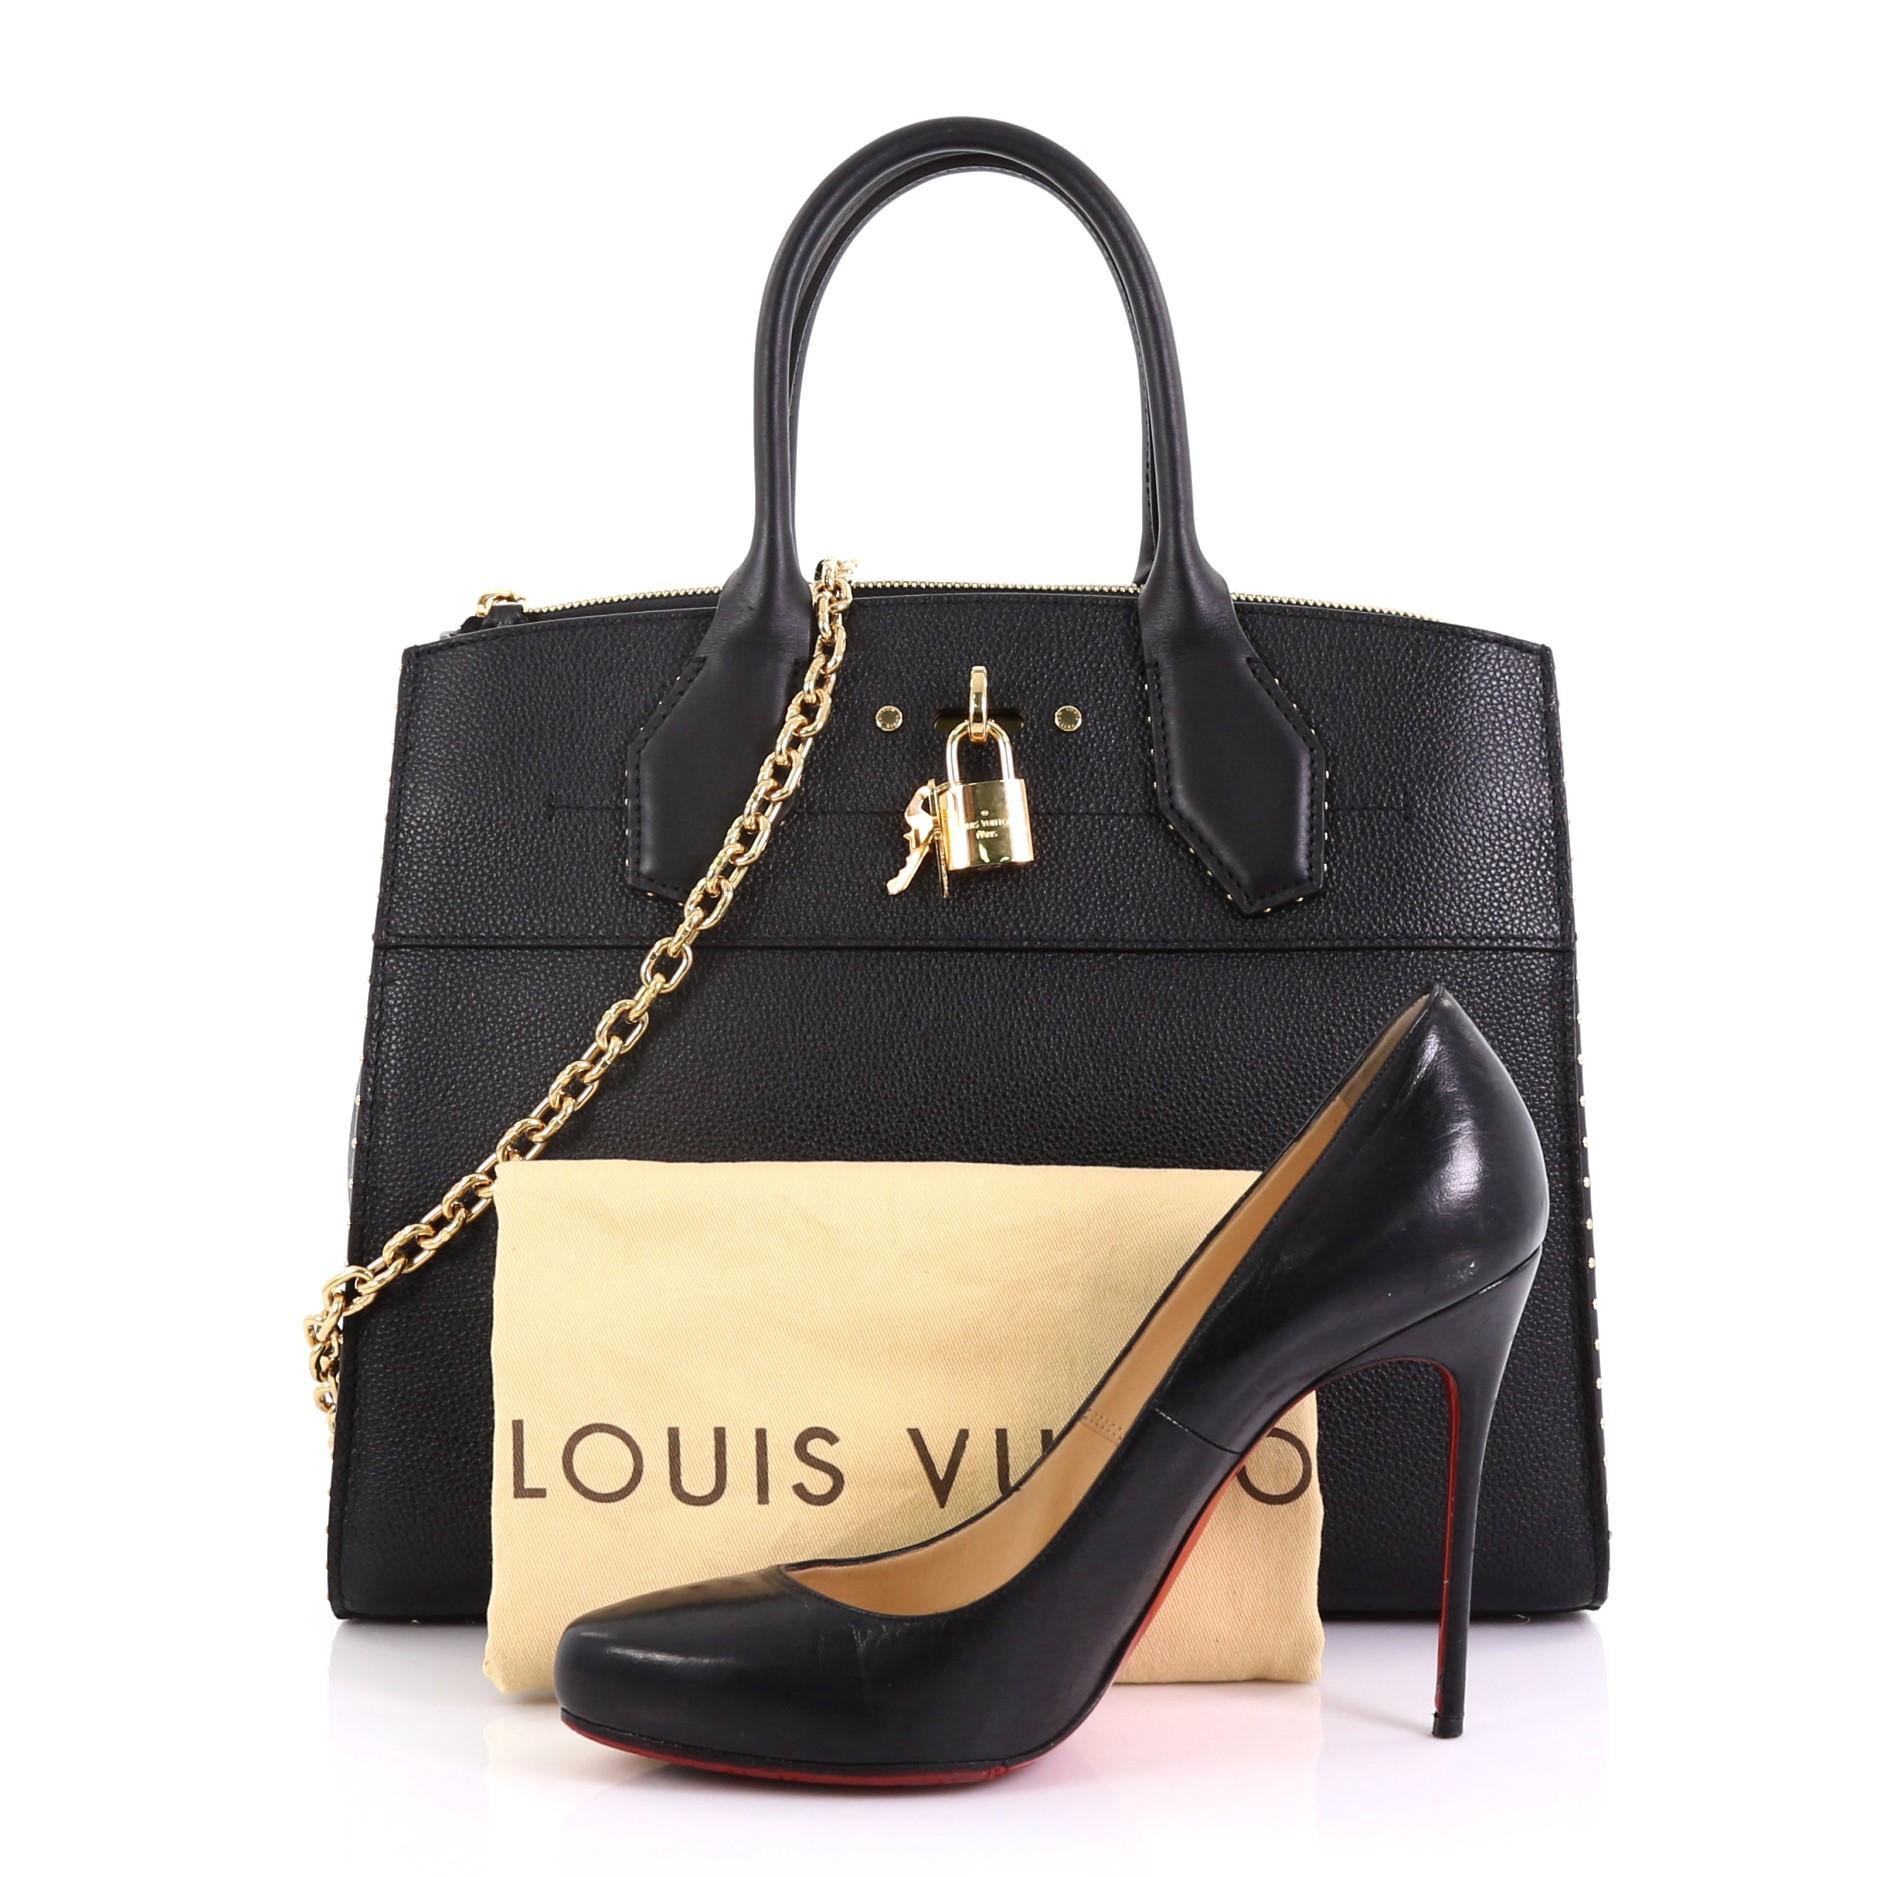 This Louis Vuitton City Steamer Handbag Studded Leather MM, crafted in black studded leather, features dual rolled leather handles, front central lock with LV stamped logo, and gold-tone hardware. It opens to a black leather interior with slip